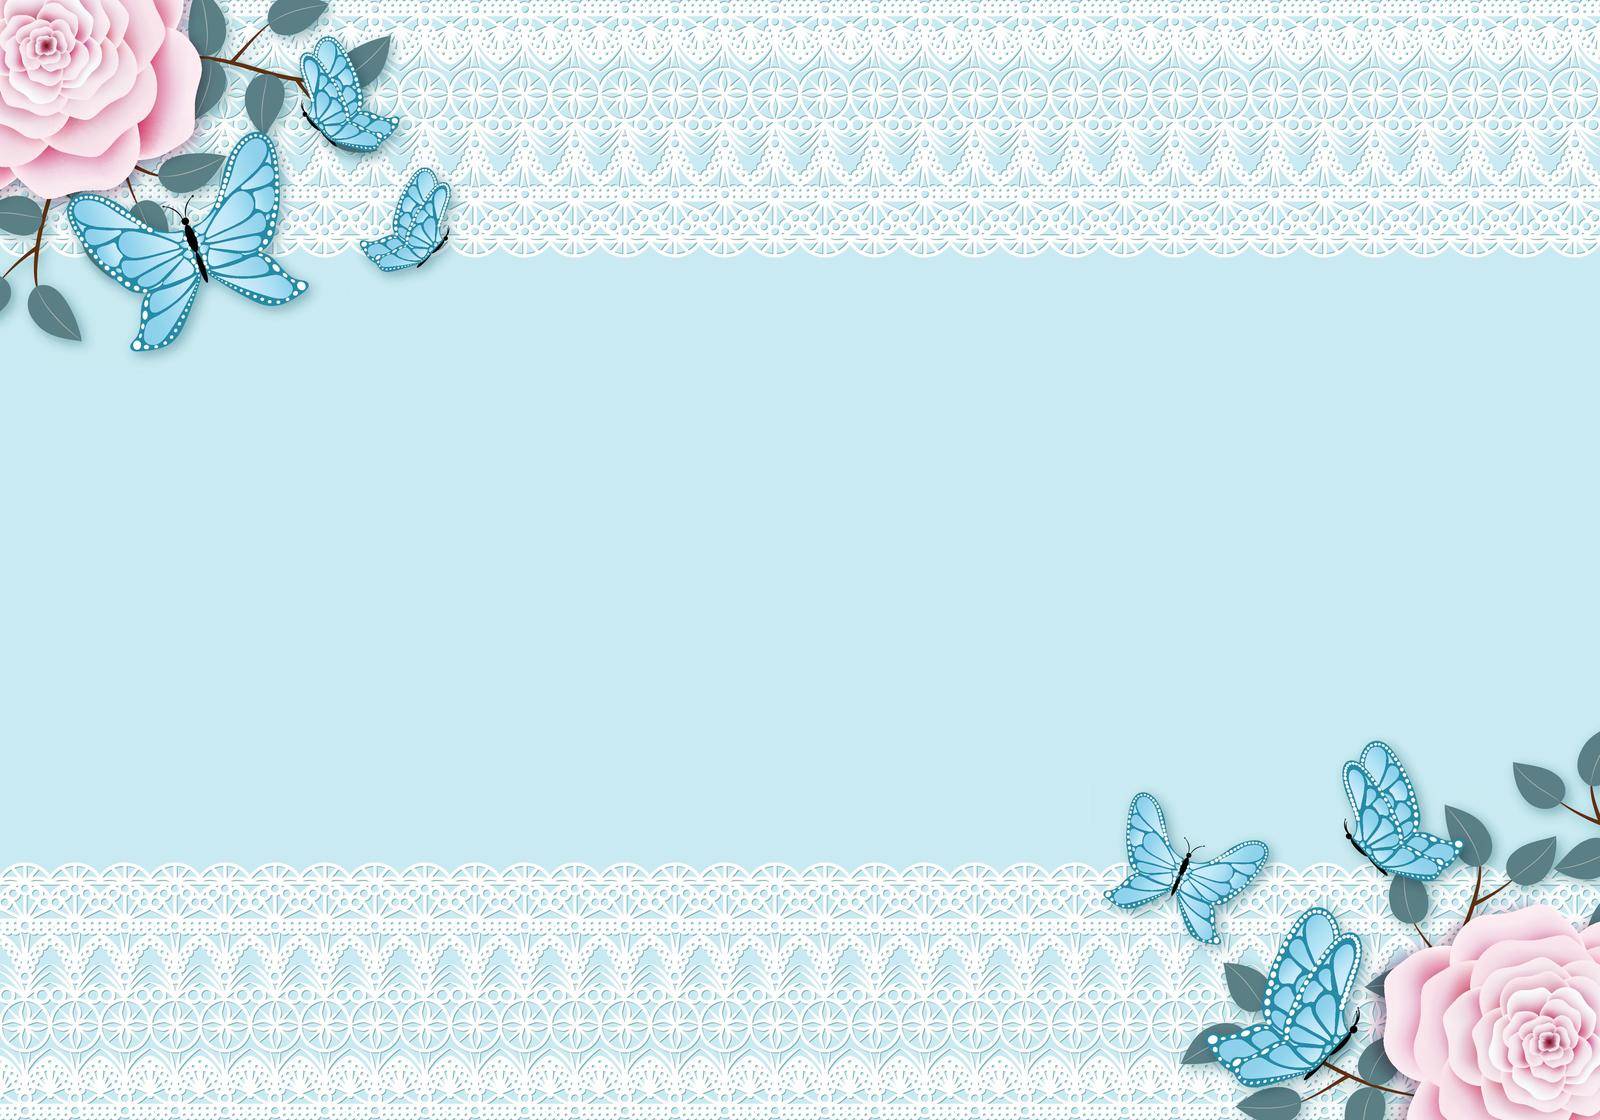 Light blue vintage background with white lace frame. Pastel colored pink rose with leafy branches and flying butterfly decoration. Copy space for the text.